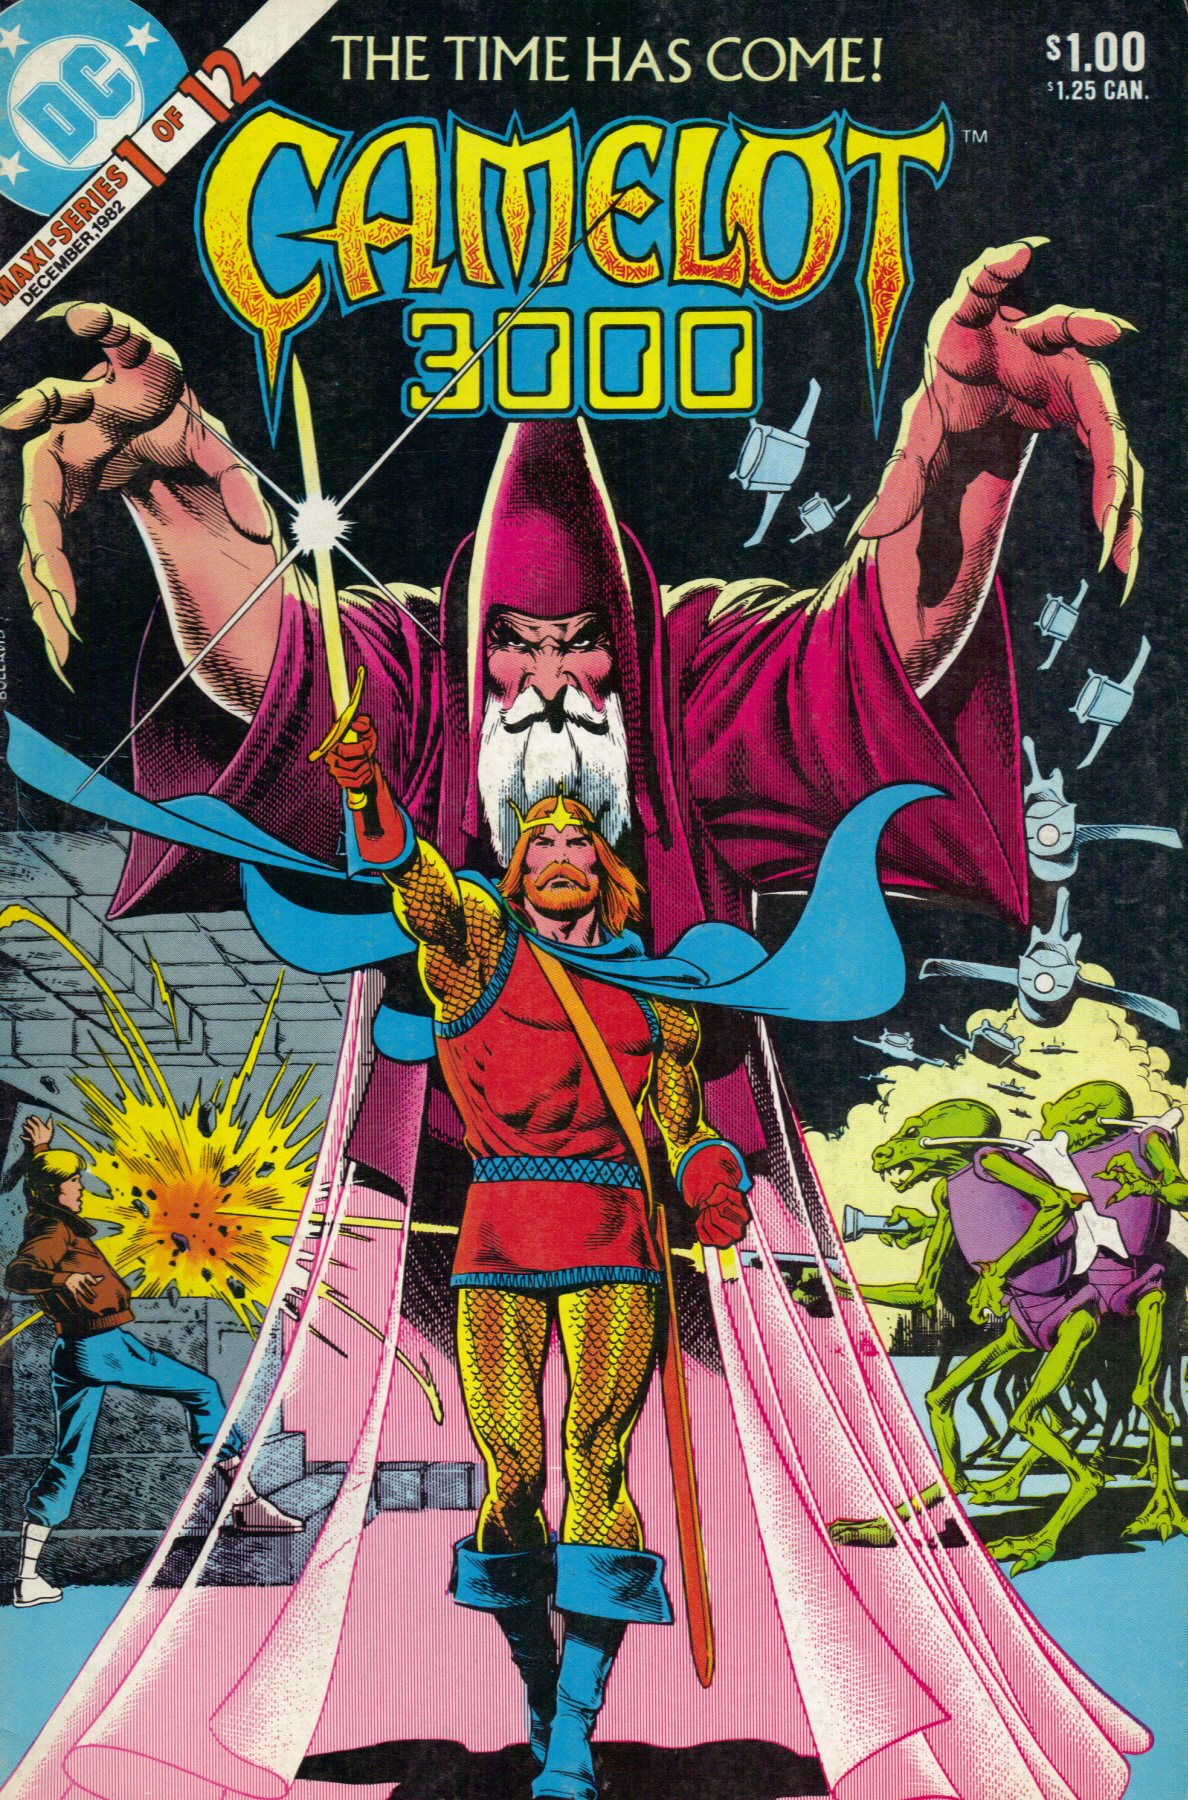 Camelot 3000 Vol 1 1 | DC Database | FANDOM powered by Wikia